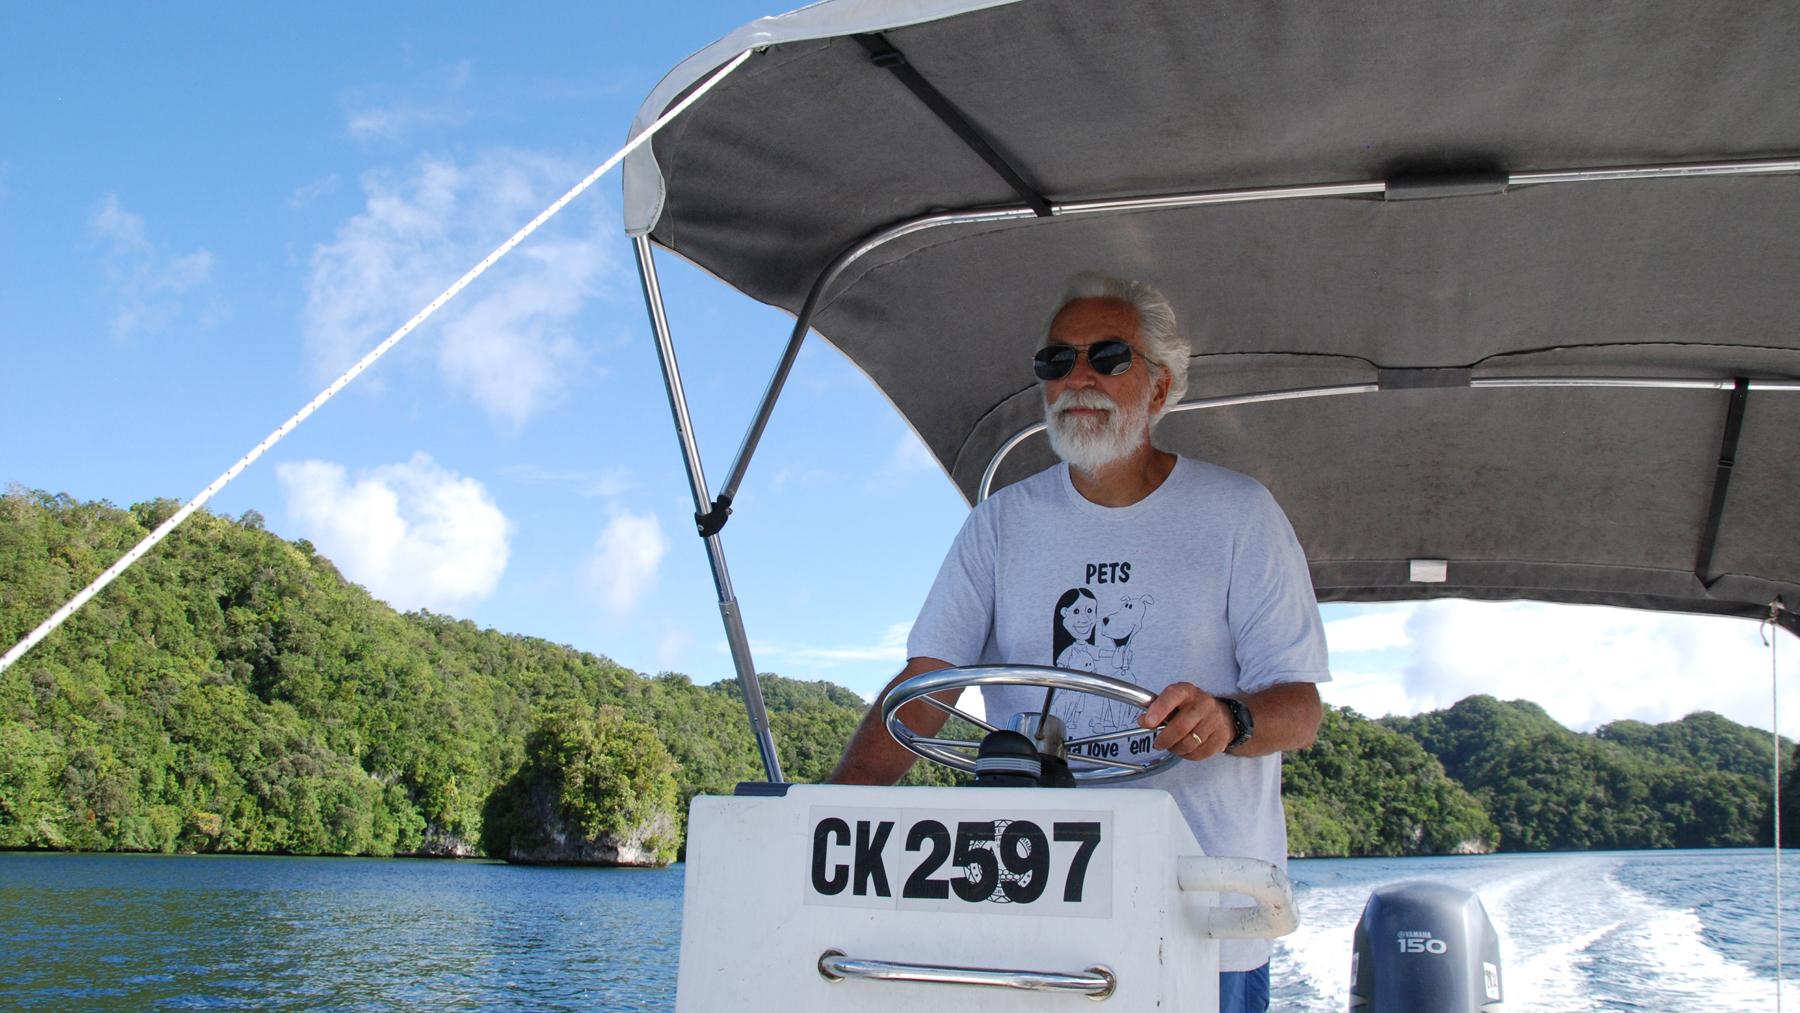 Pat Colin, a marine scientist at the Coral Reef Research Foundation, explores the waters off of the Pacific island nation of Palau for organisms to send to the National Cancer Institute in the U.S.